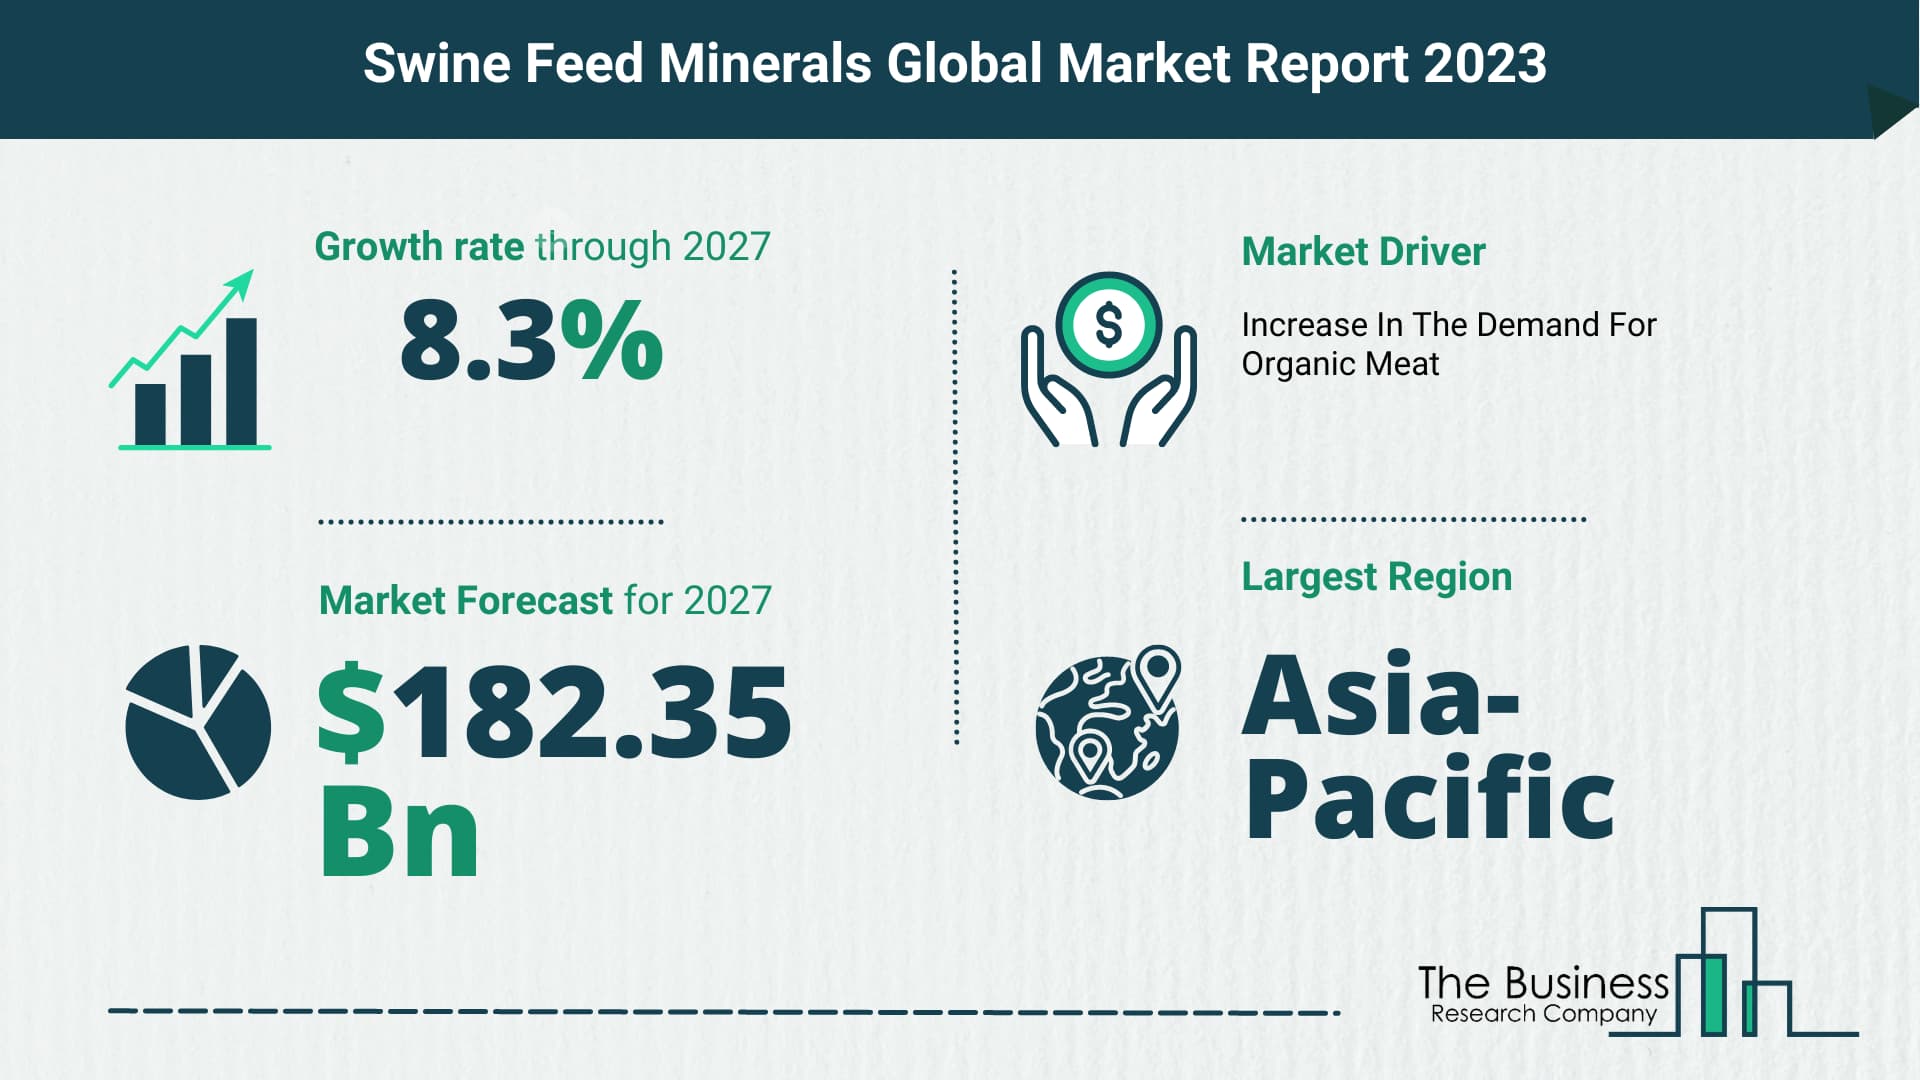 Global Swine Feed Minerals Market Opportunities And Strategies 2023